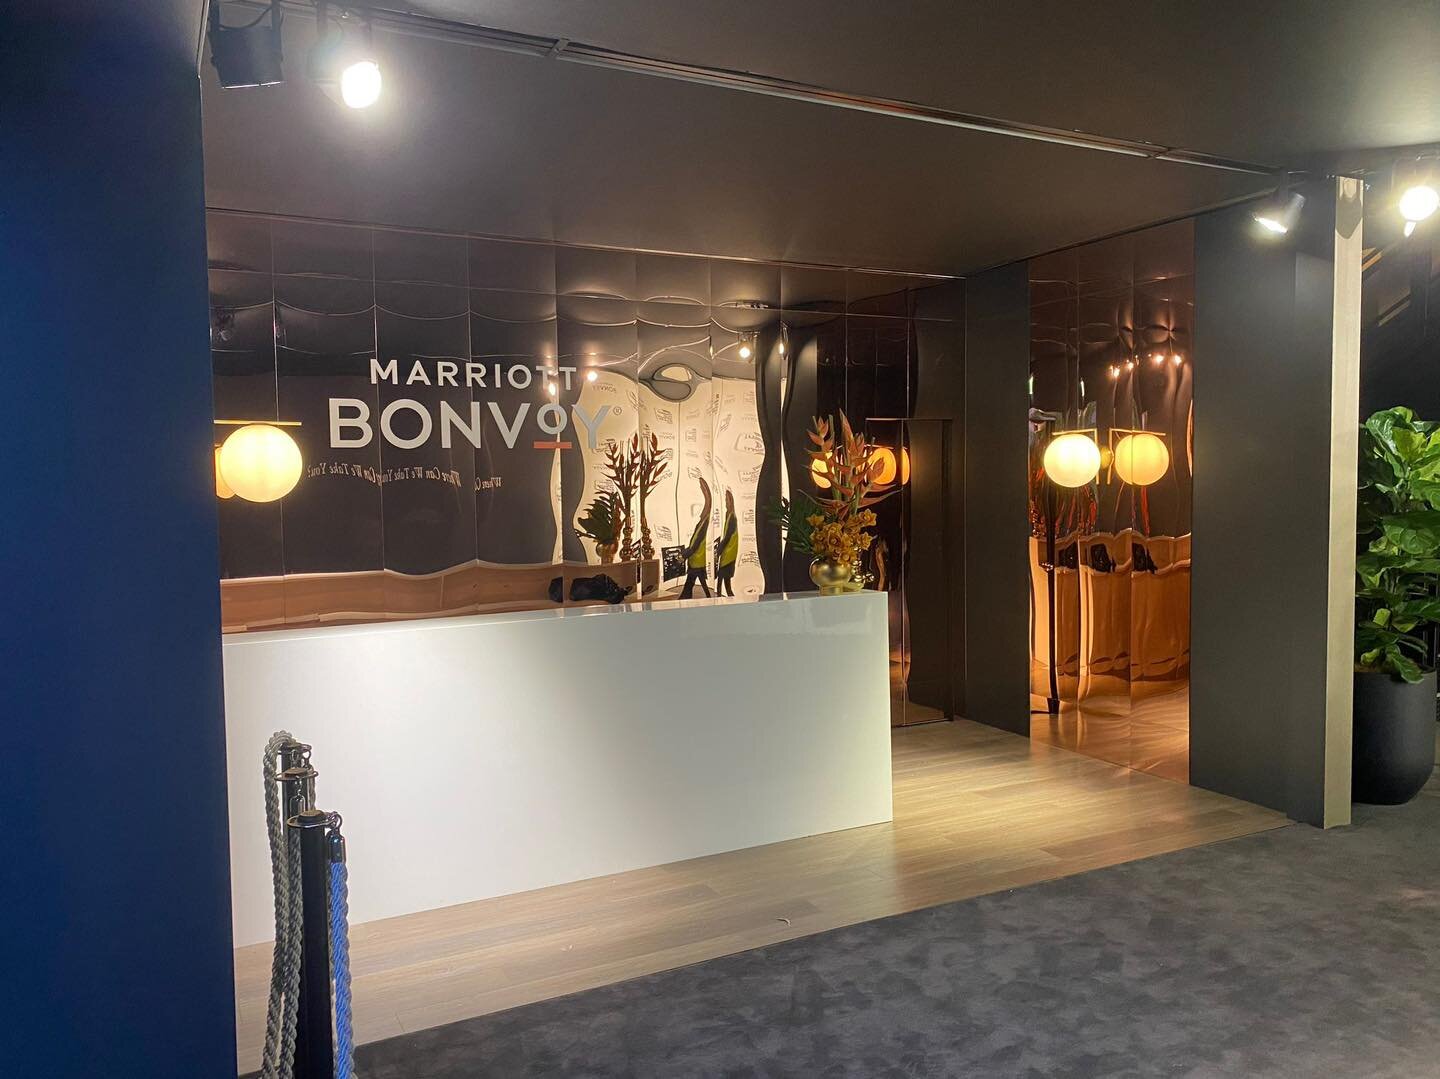 Marriott Bonvoy | Melbourne GP 2023

The Melbourne GP is off and racing this weekend and we had the pleasure of completing some works in multiple marquees.

In pole position we have the @marriottbonvoy. Take a look at some of our works from inside th